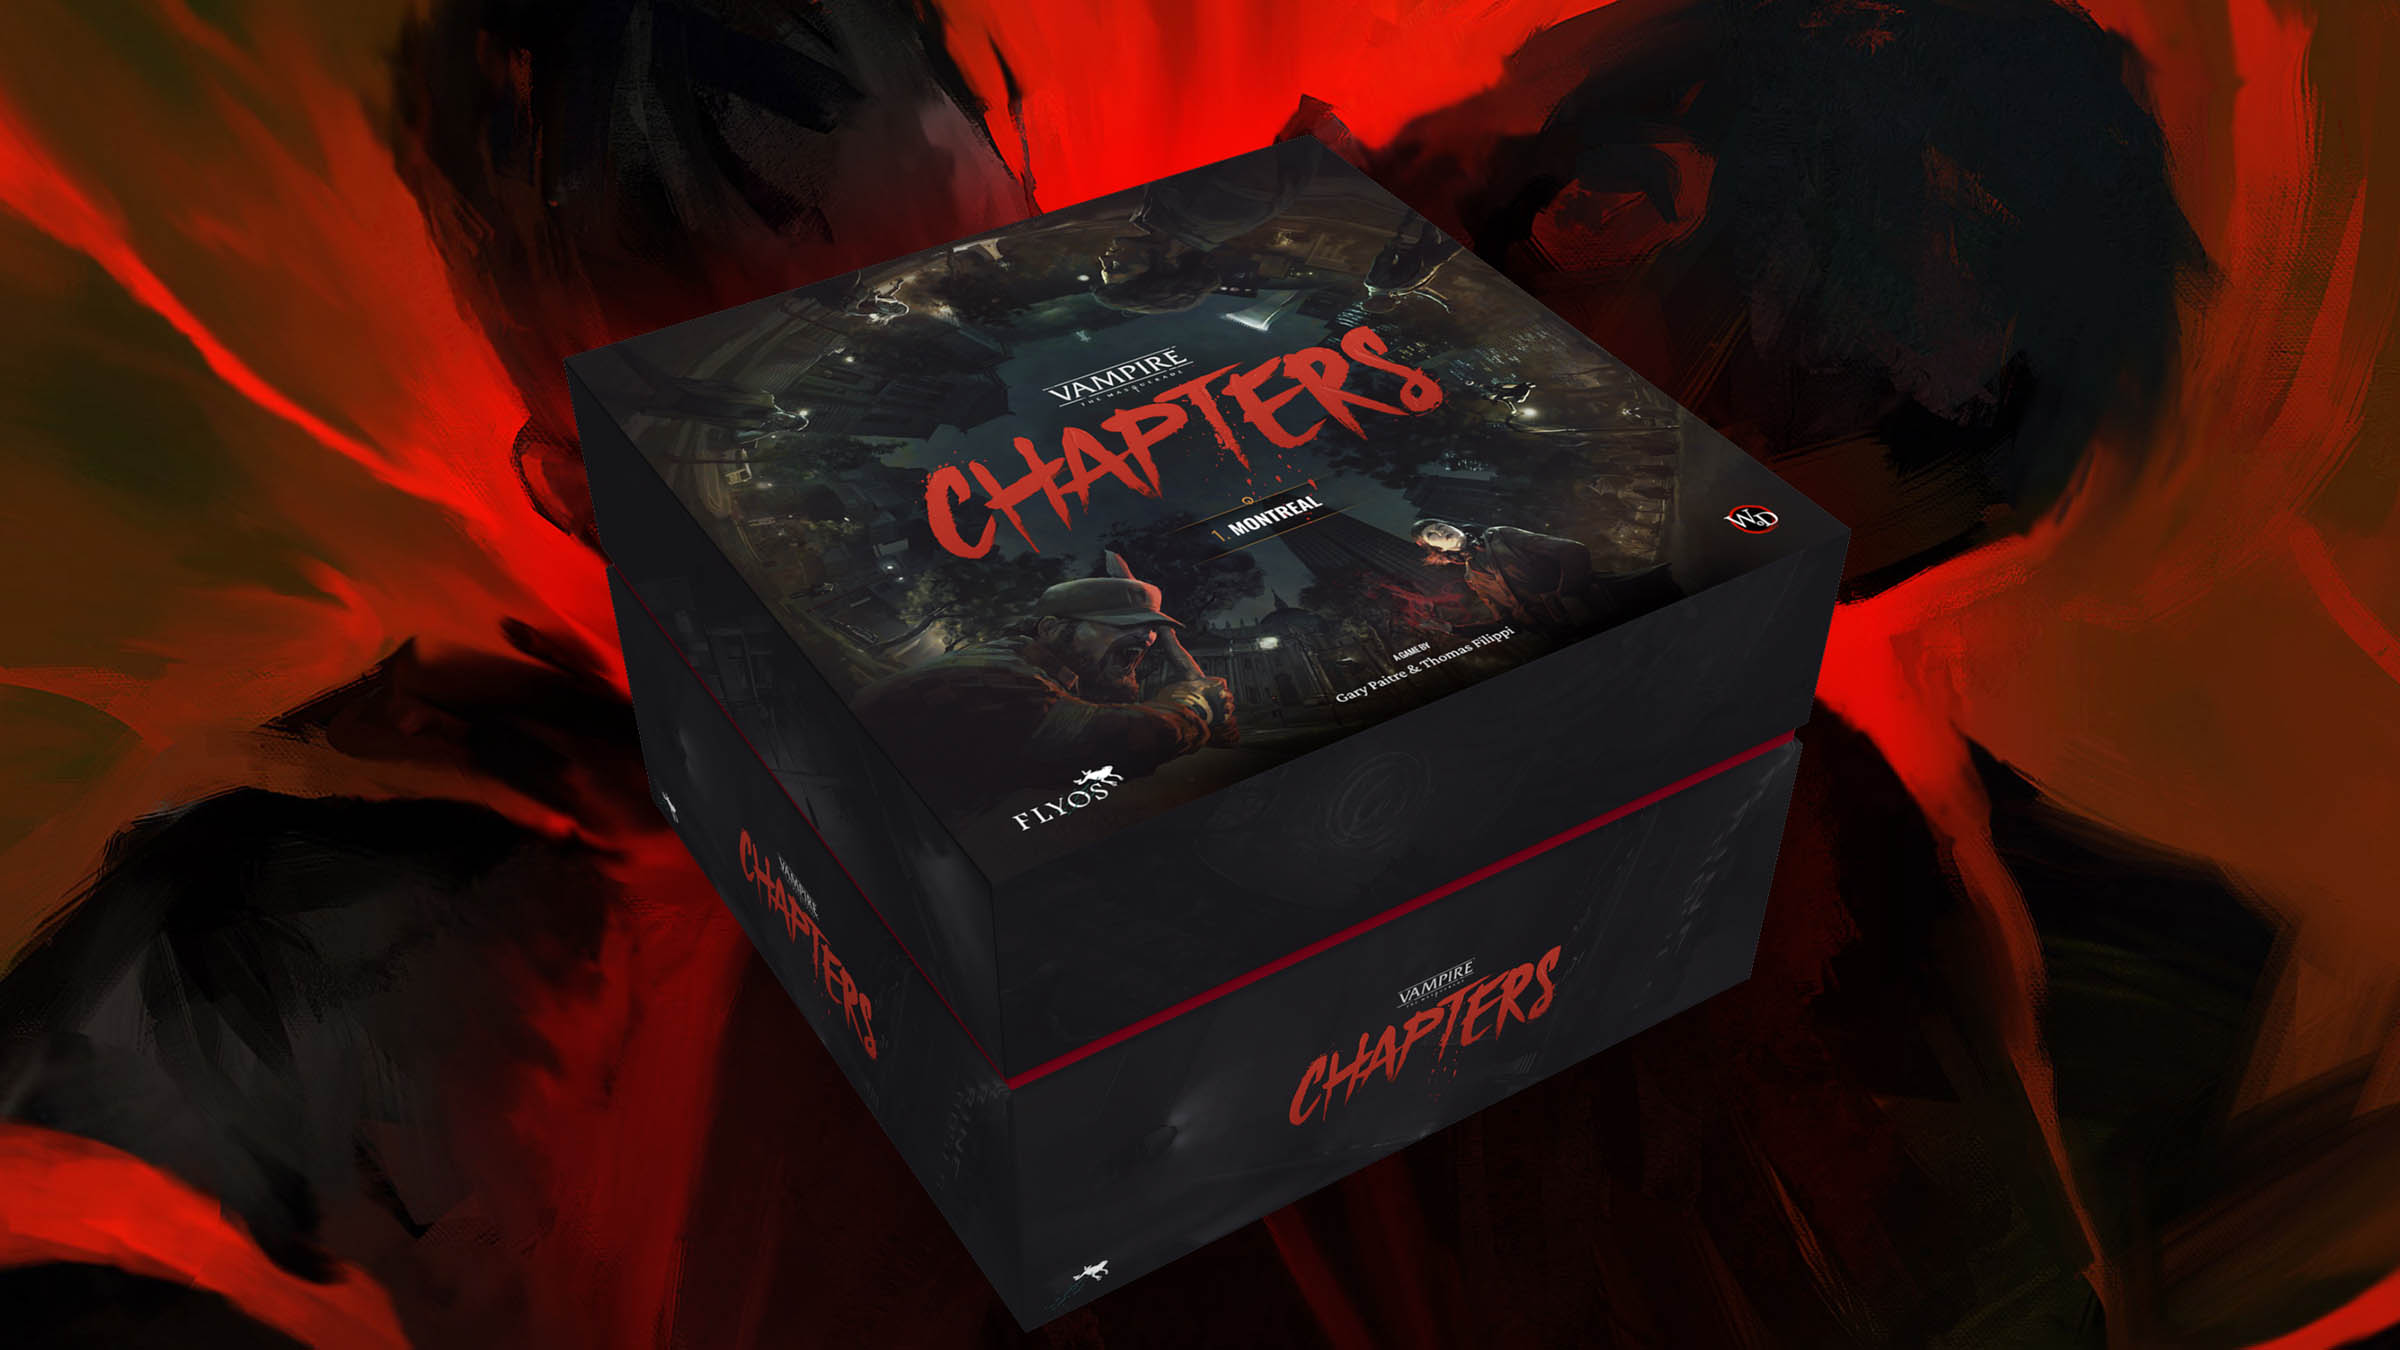 Vampire the Masquerade: Chapters - Montreal, Board Games